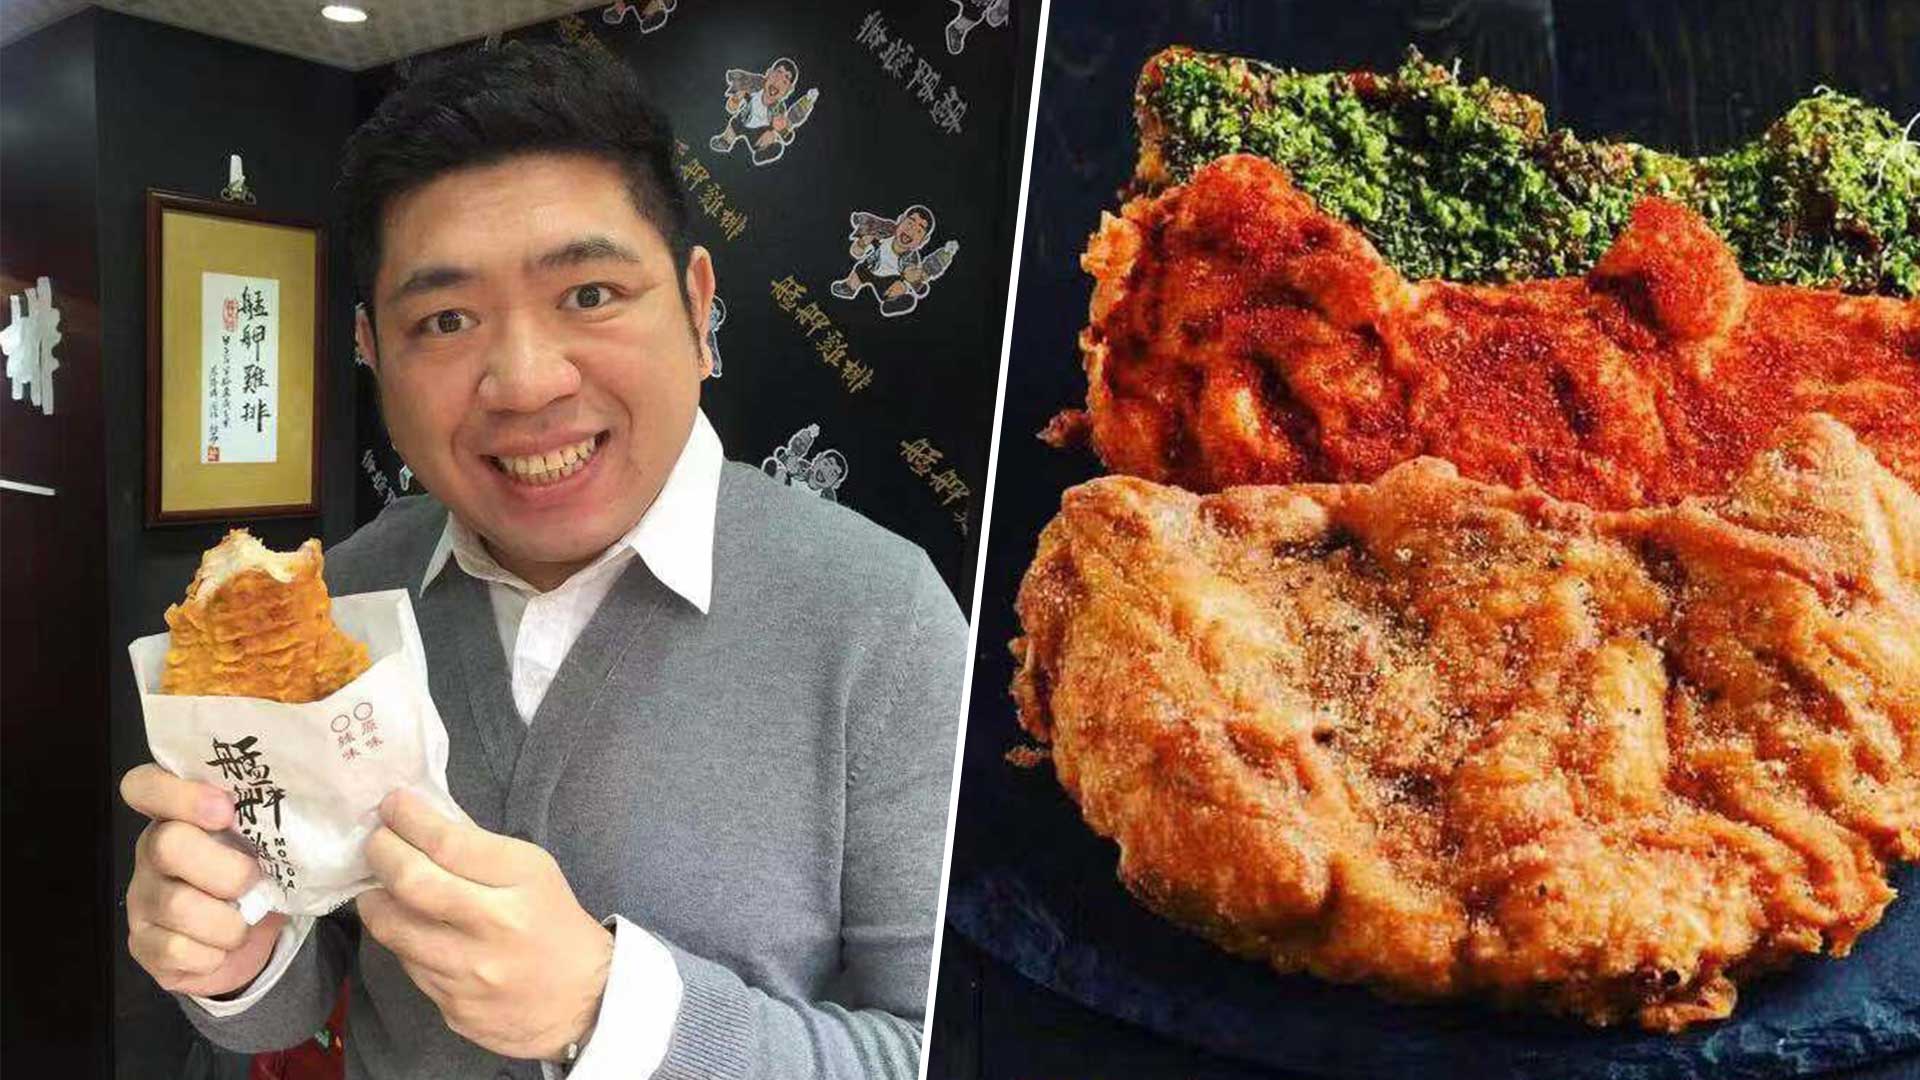 Taiwanese Comedian Nono’s Monga Fried Chicken Chain Opening First S’pore Outlet At Mall In Jurong